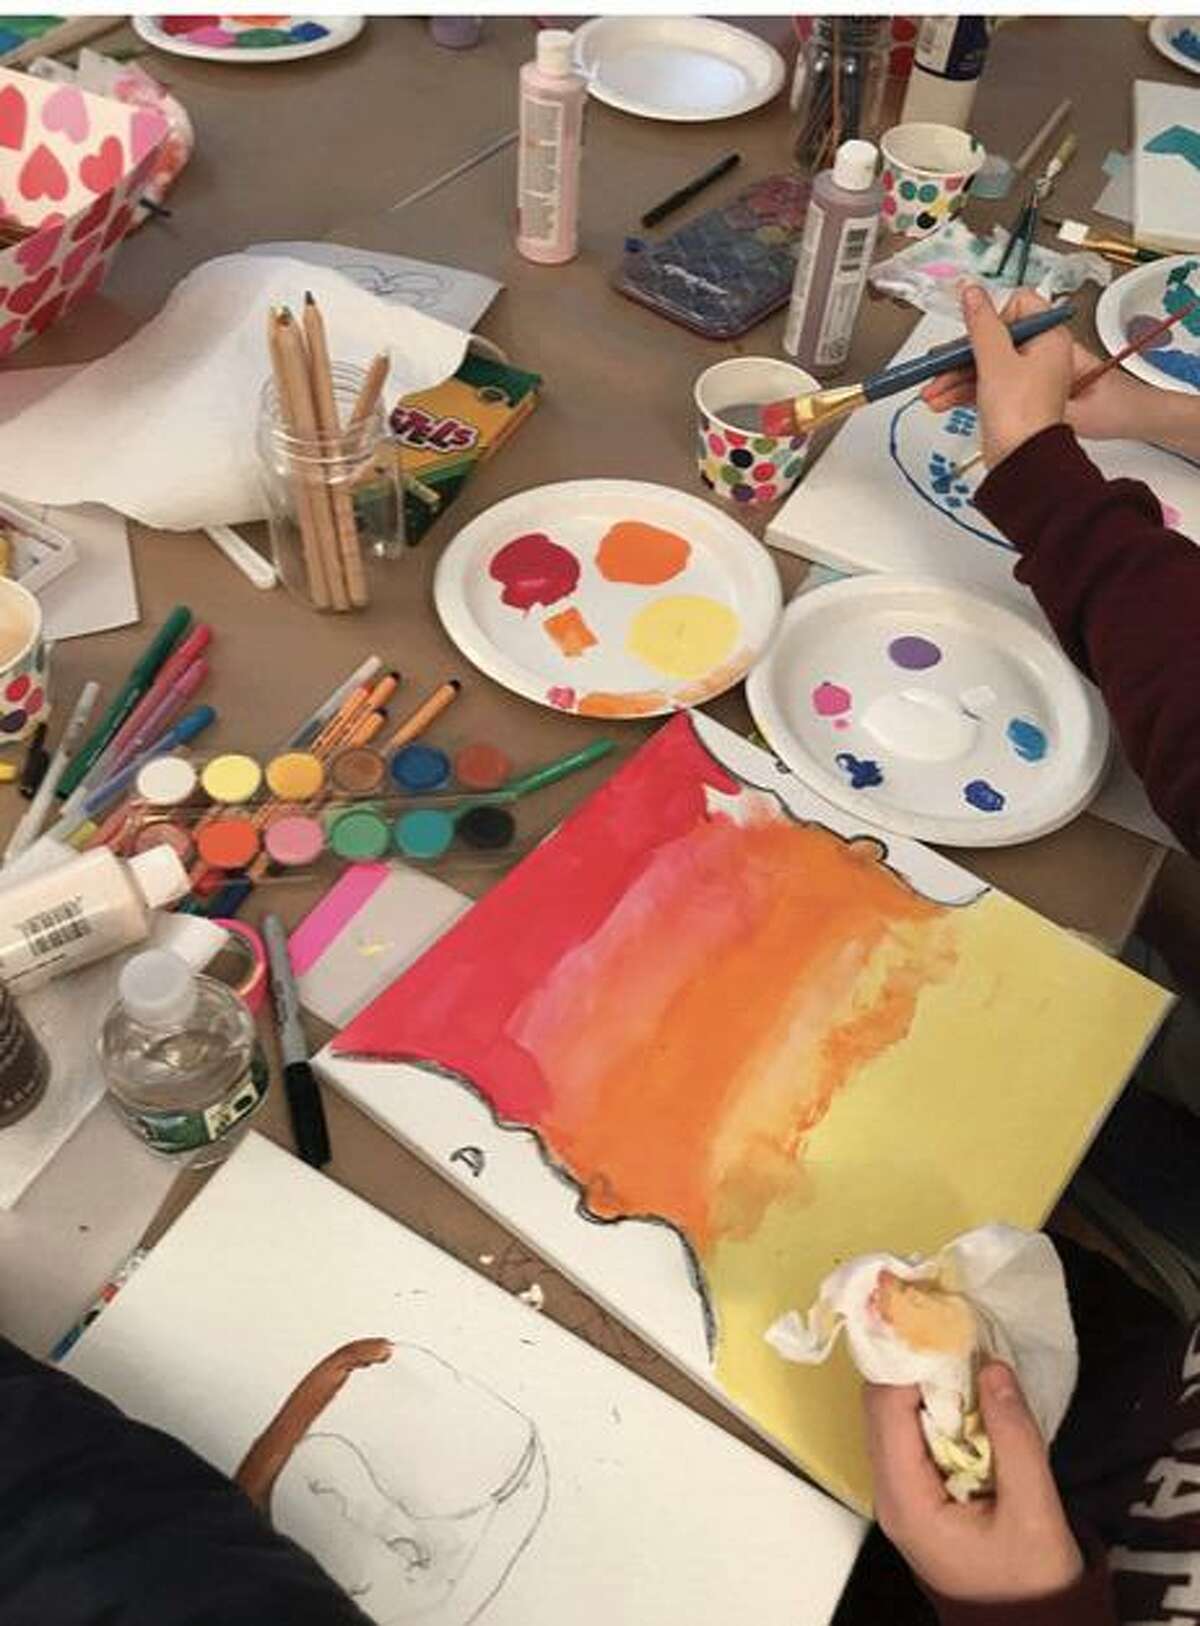 Mixed media color explorations are coming to the Carriage Barn Arts Center in New Canaan’s Waveny Park in the form of special art class sessions aimed for children ages four to 11. The sessions will be held throughout the month of April.